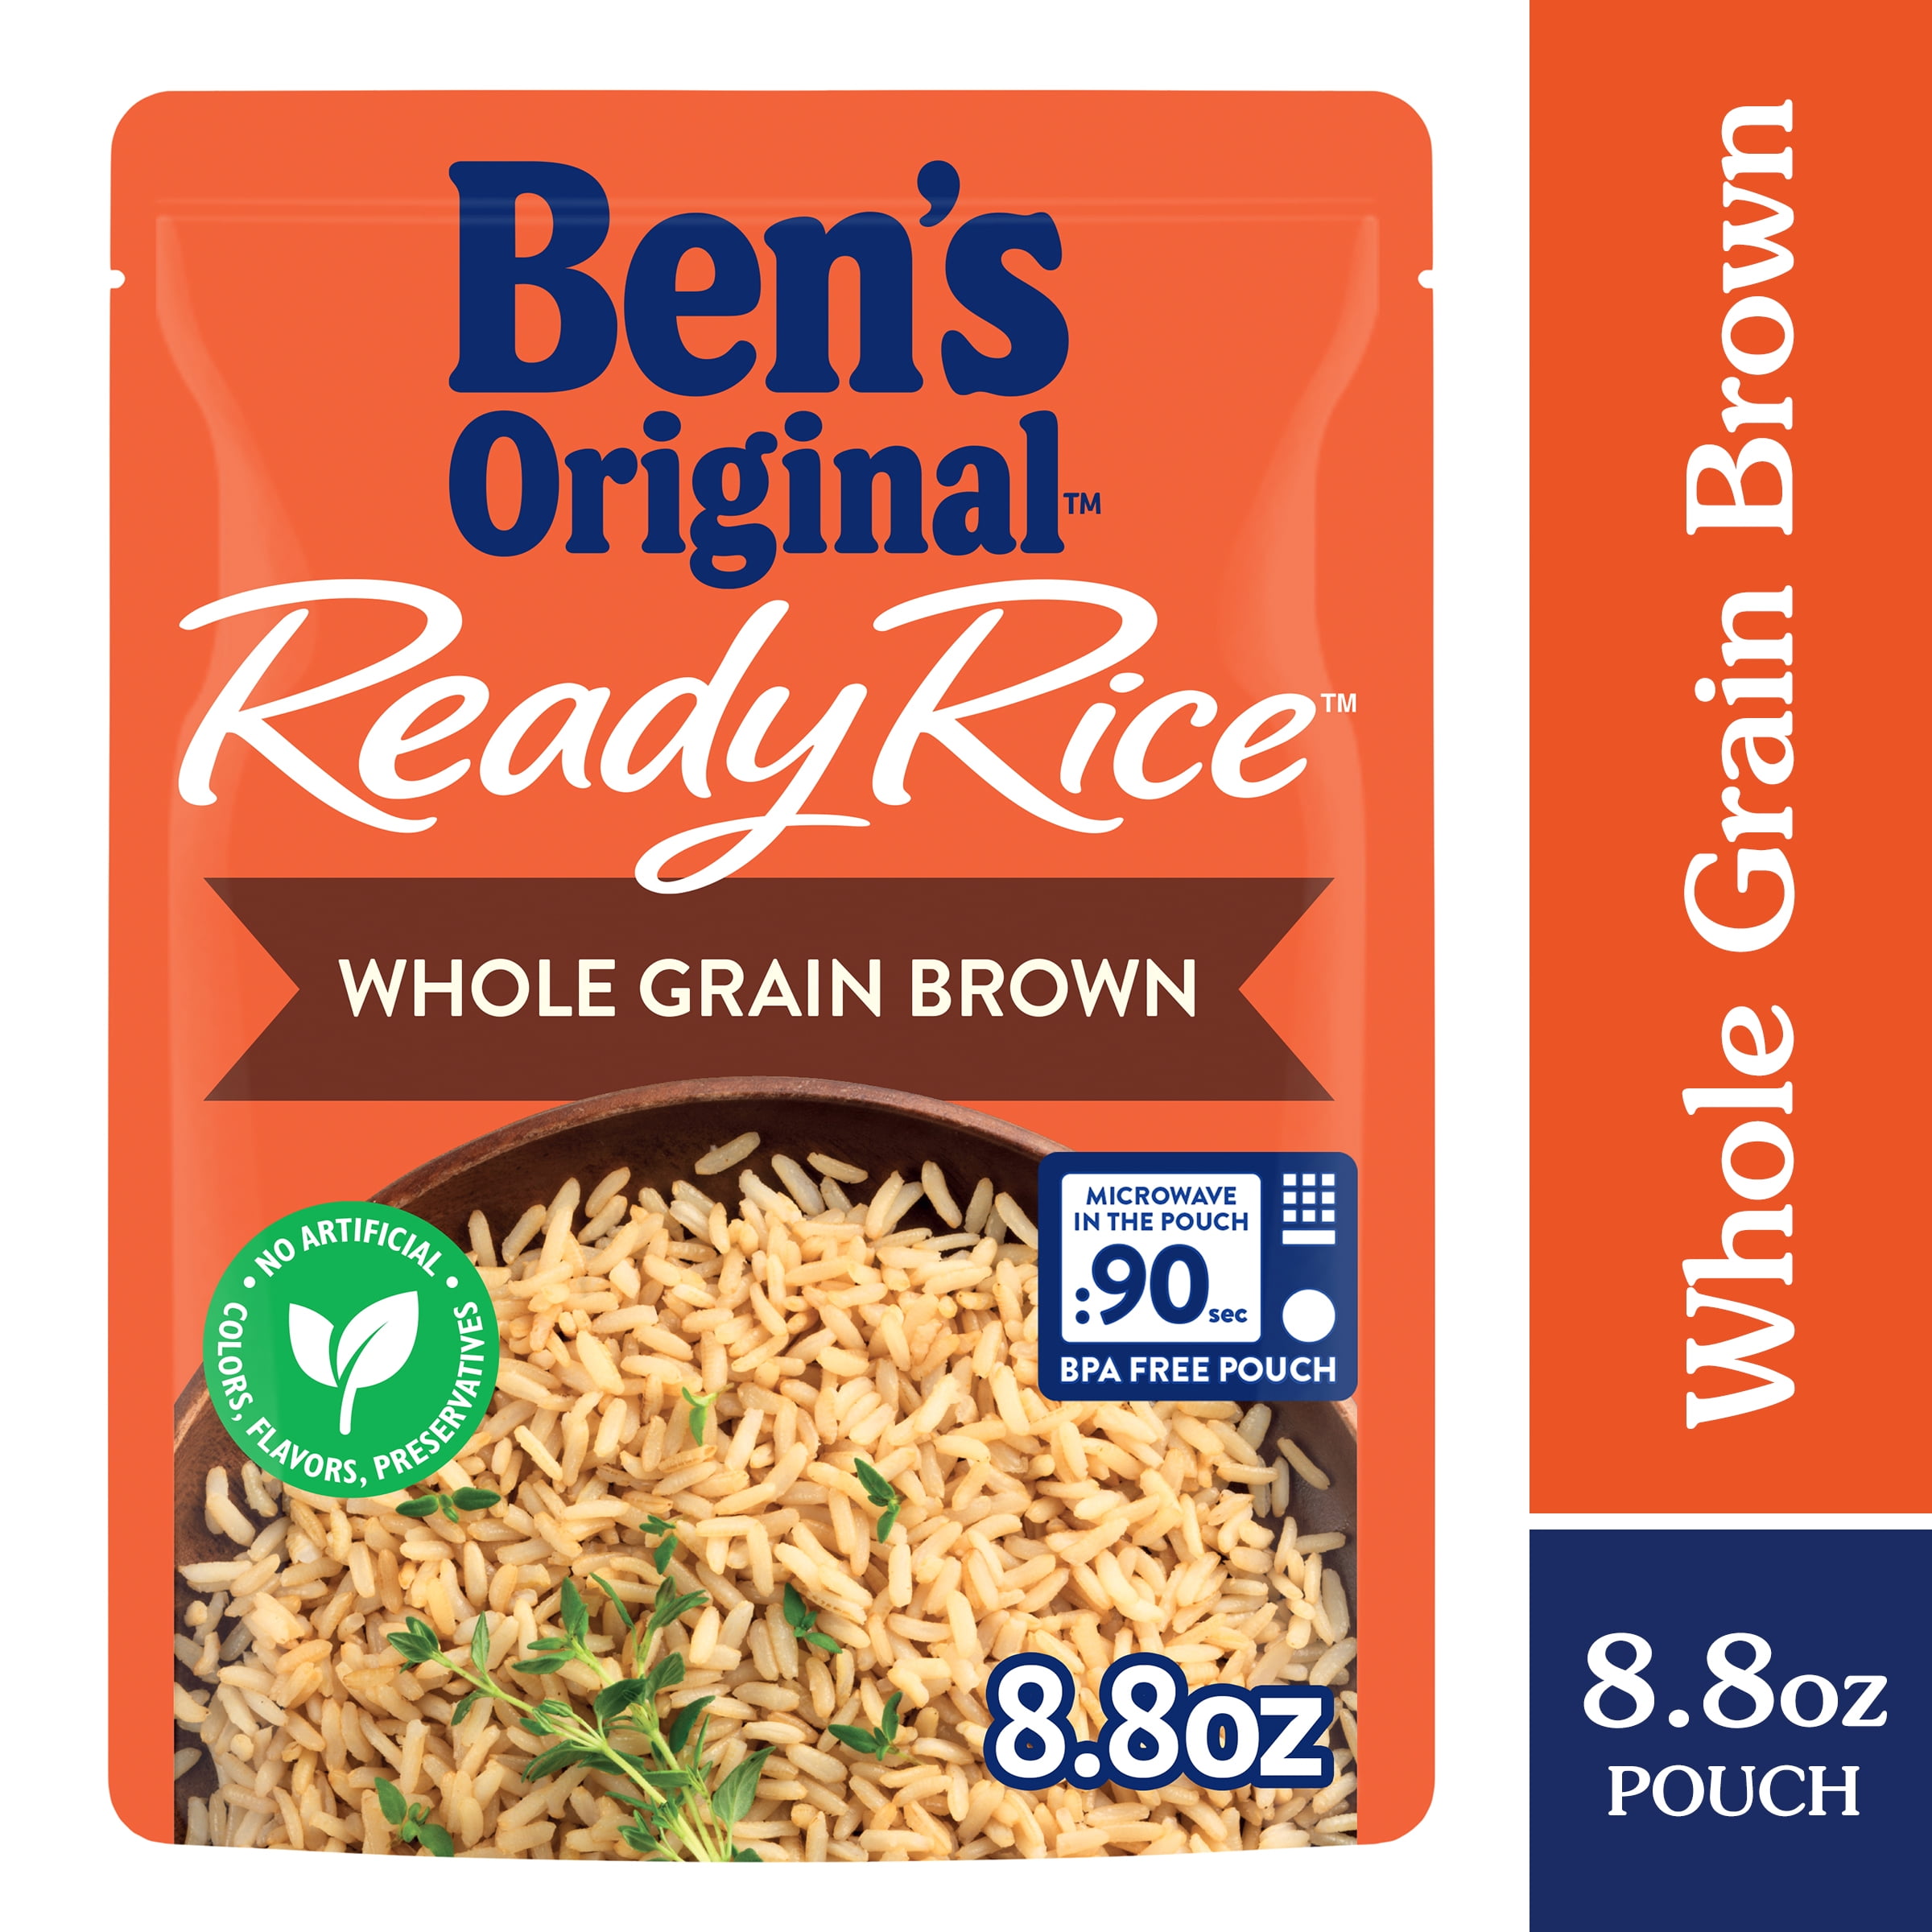 BEN'S ORIGINAL Ready Rice Whole Grain Brown Rice, Easy Dinner Side, 8.8 OZ Pouch